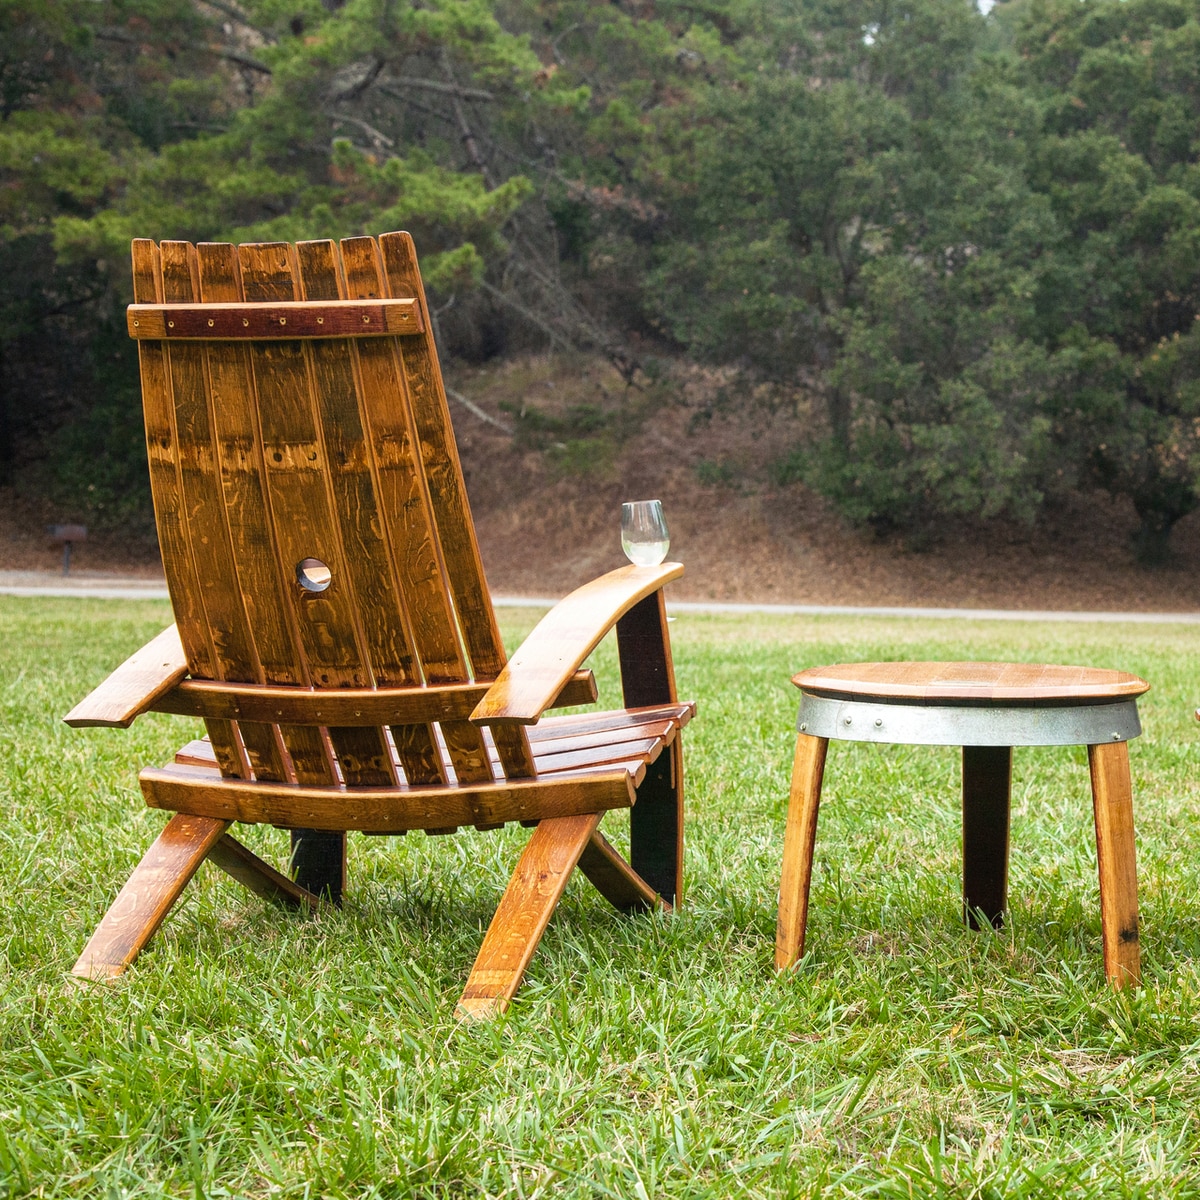 Adirondack Chair Made From an Old Wine Barrel - Wooden Wine Glass holding chair - Wine slot chair